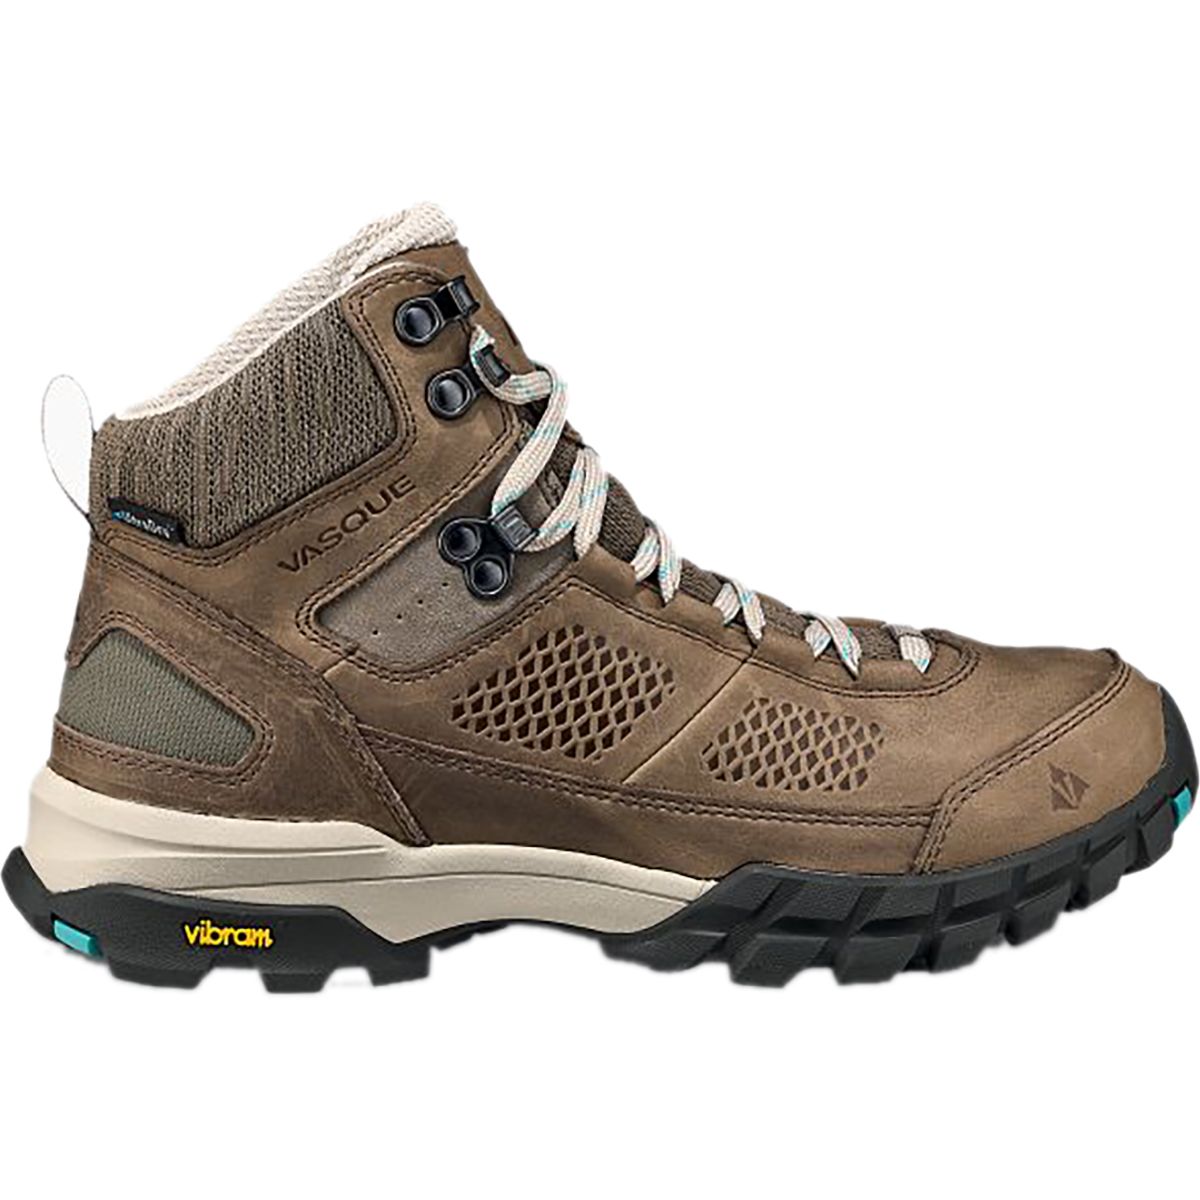 Vasque Talus AT UltraDry Hiking Boot - Women's